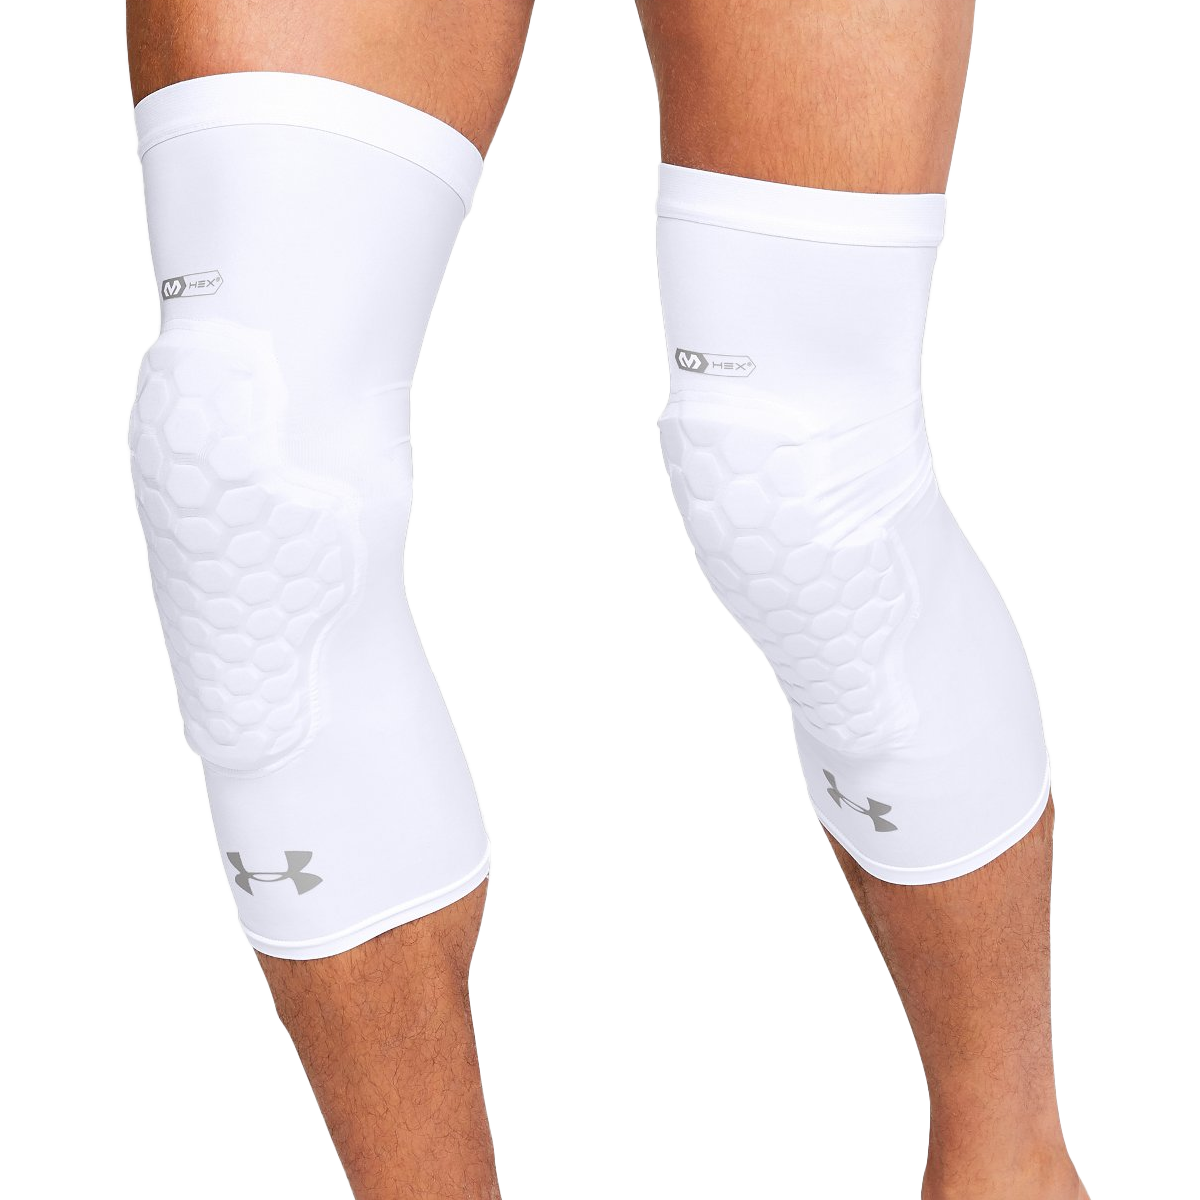  Under Armour Elbow / Knee / Shin Sleeve with Pads.  Multipurpose Compression and HEX Padding for Protection. Active Wear for  Basketball, Football, Tennis, & Weightlifting (1 Pair) Coderas de  Proteccion